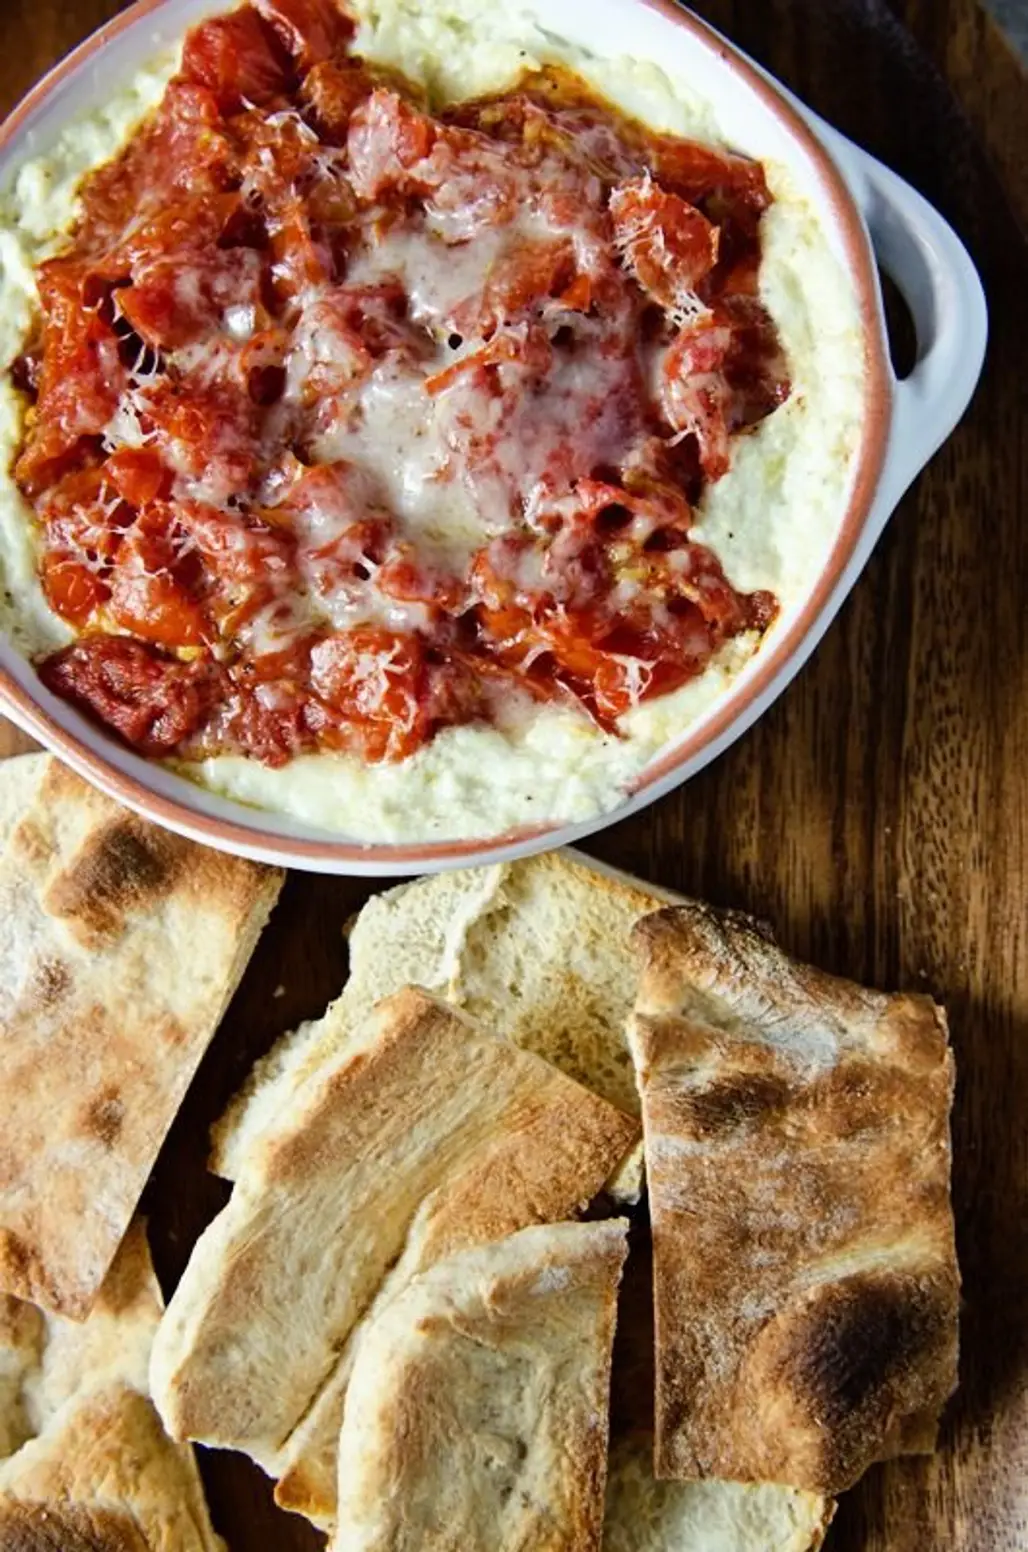 Warm Goat Cheese Dip with Artichokes and Roasted Tomatoes